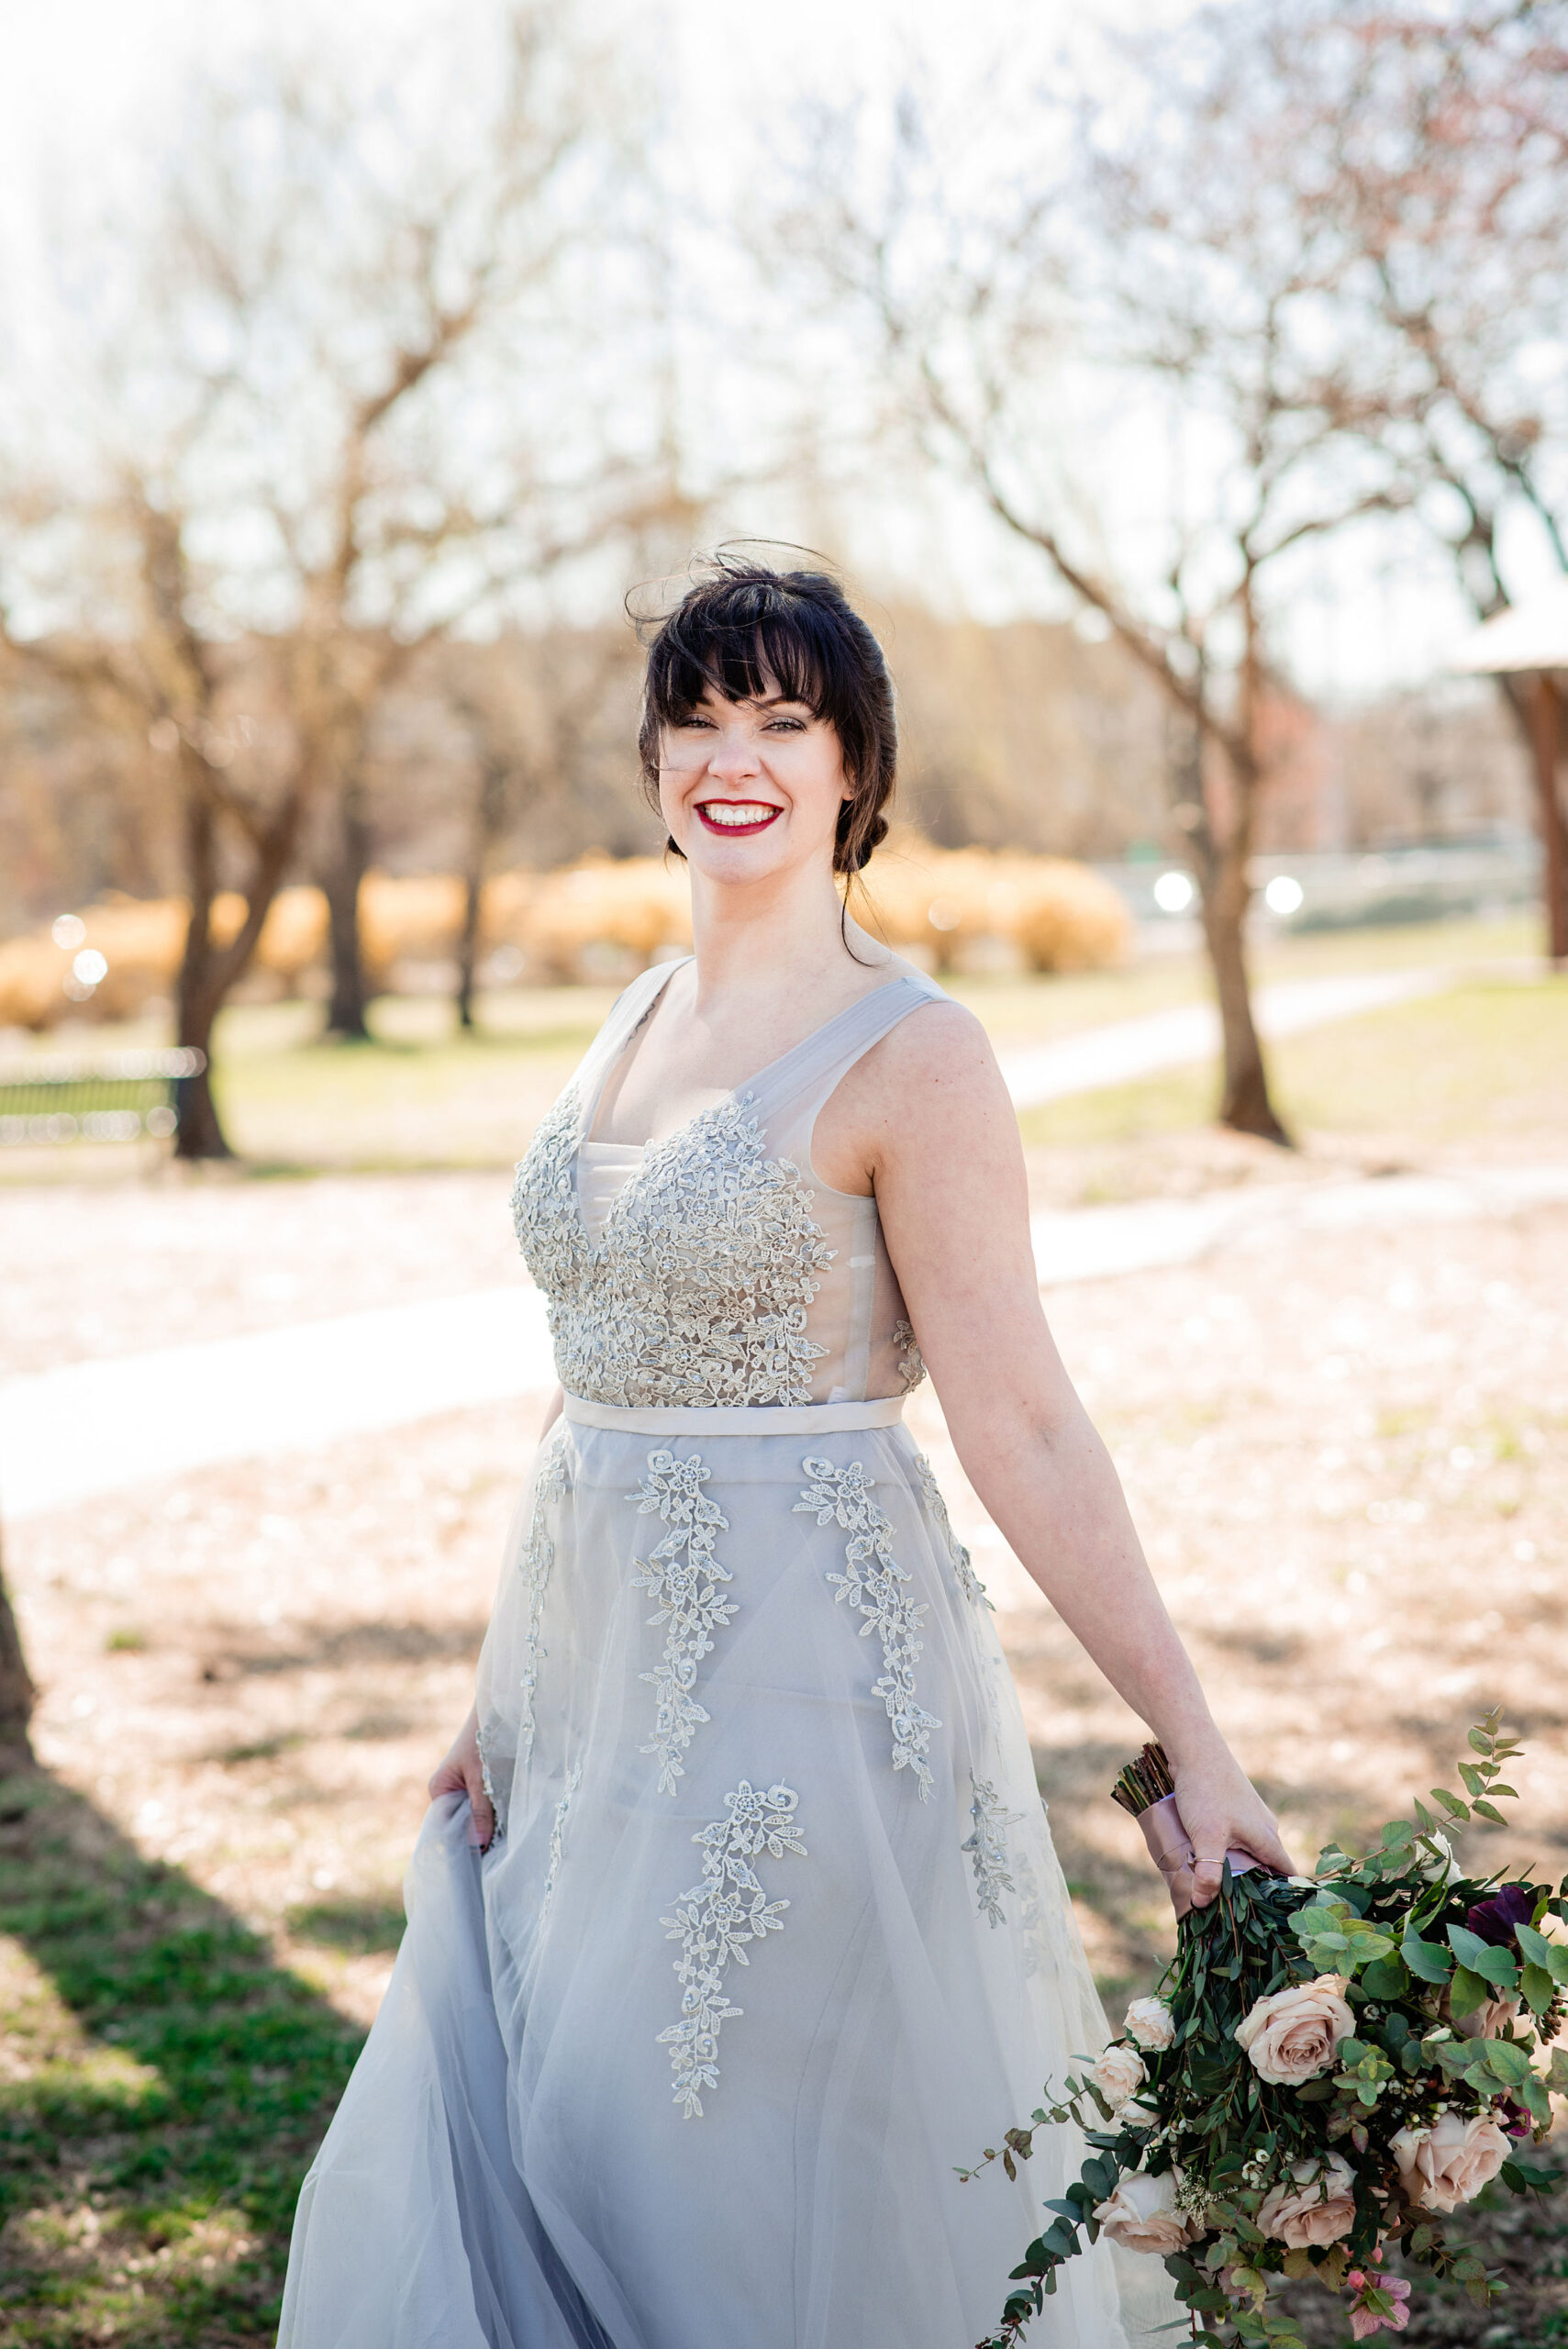 The bride is wearing a v-neck silver lace wedding dress with a tulle skirt and floral appliques. She is holding a large bouquet of eucalyptus with blush roses and pink berries. 